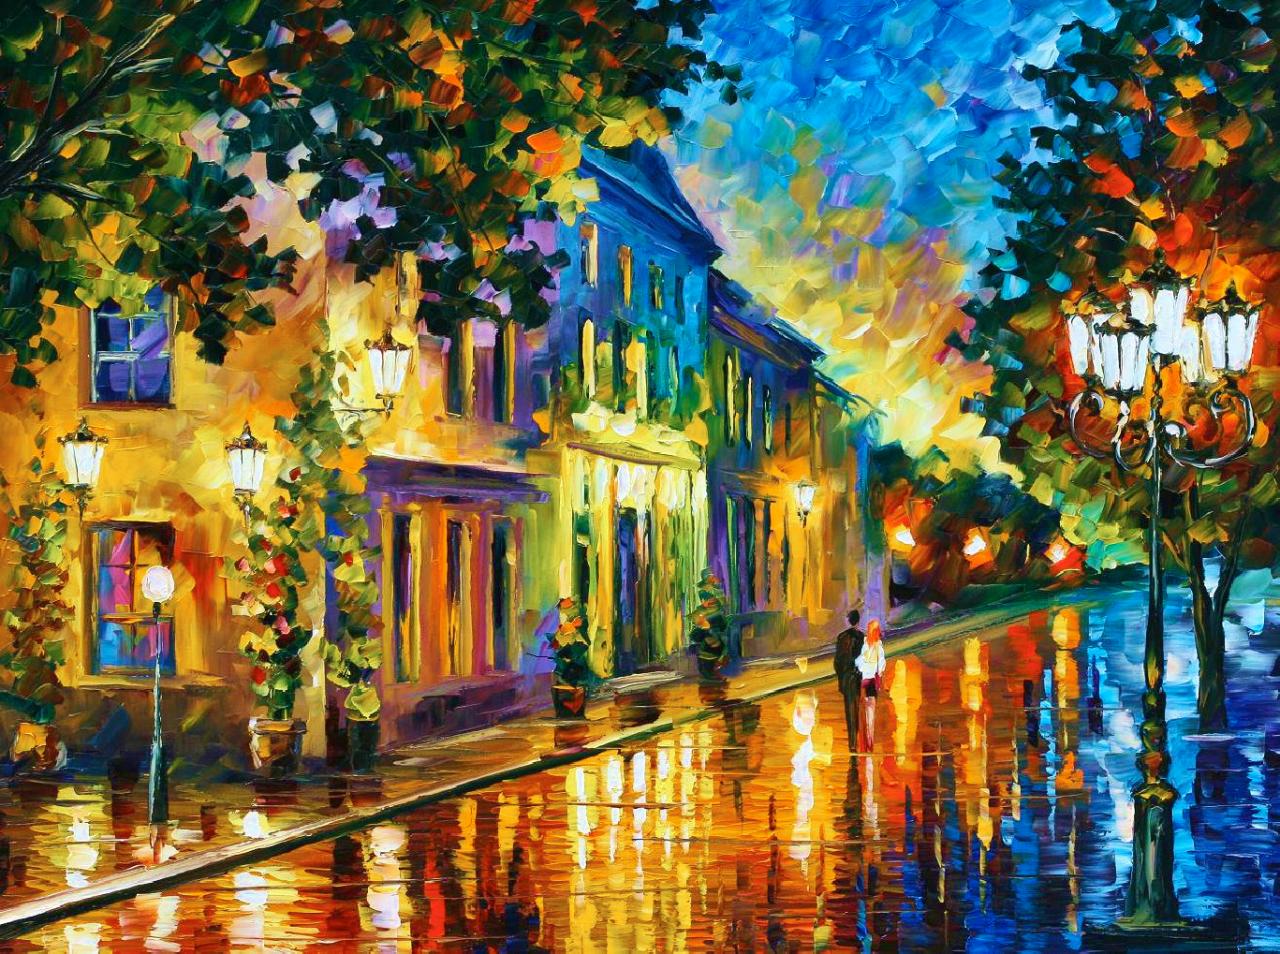 On The Way To Morning — Print On Canvas By Leonid Afremov - Size 40" X 30" (100cm X 75cm)